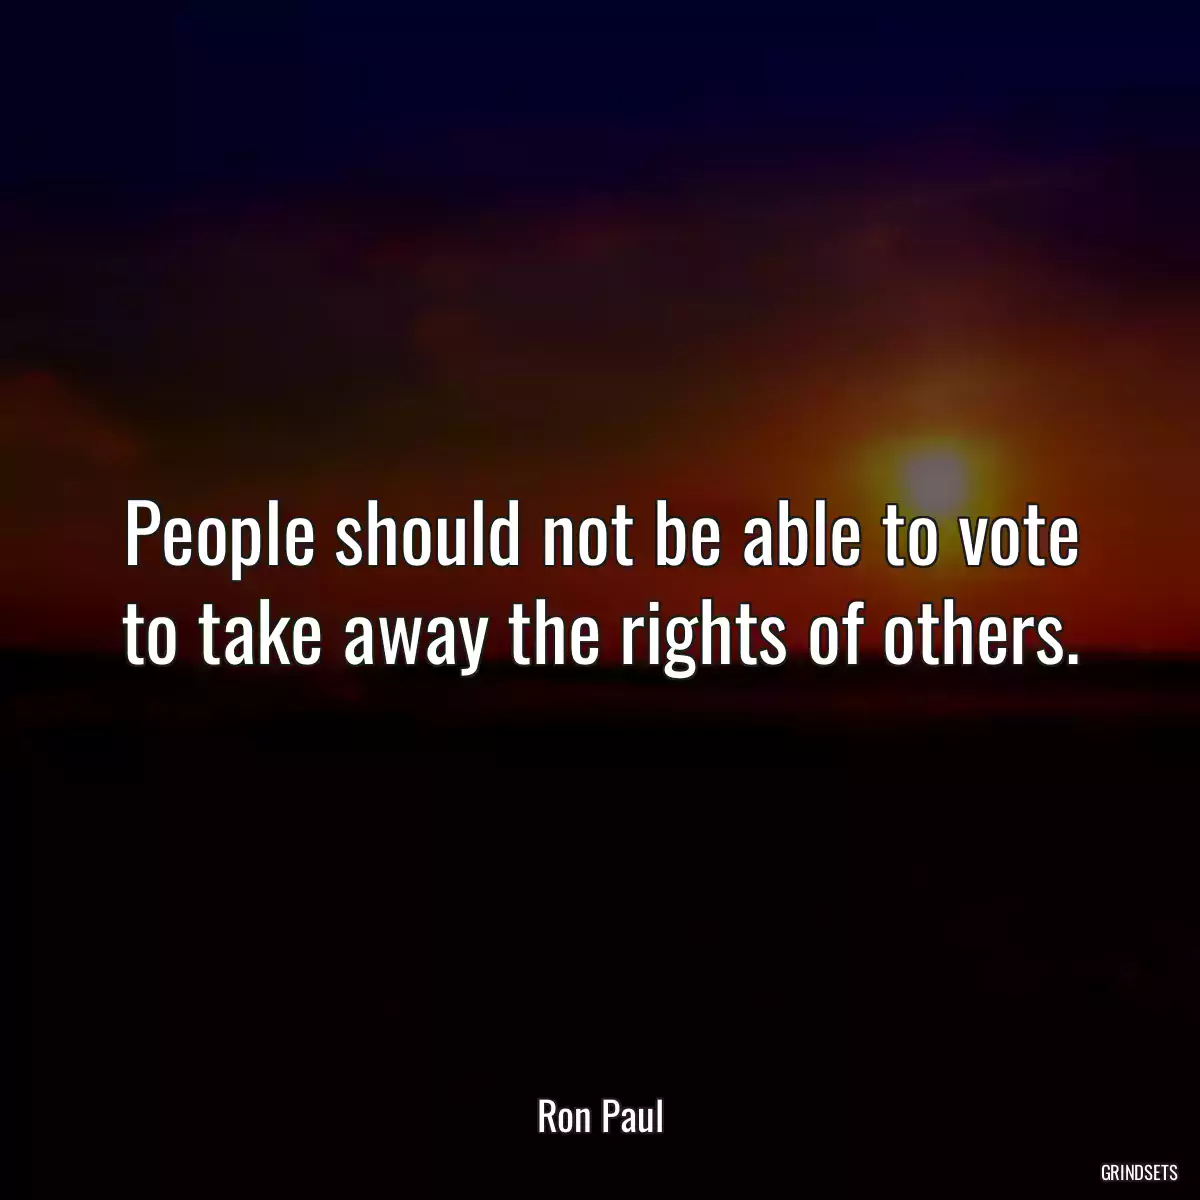 People should not be able to vote to take away the rights of others.